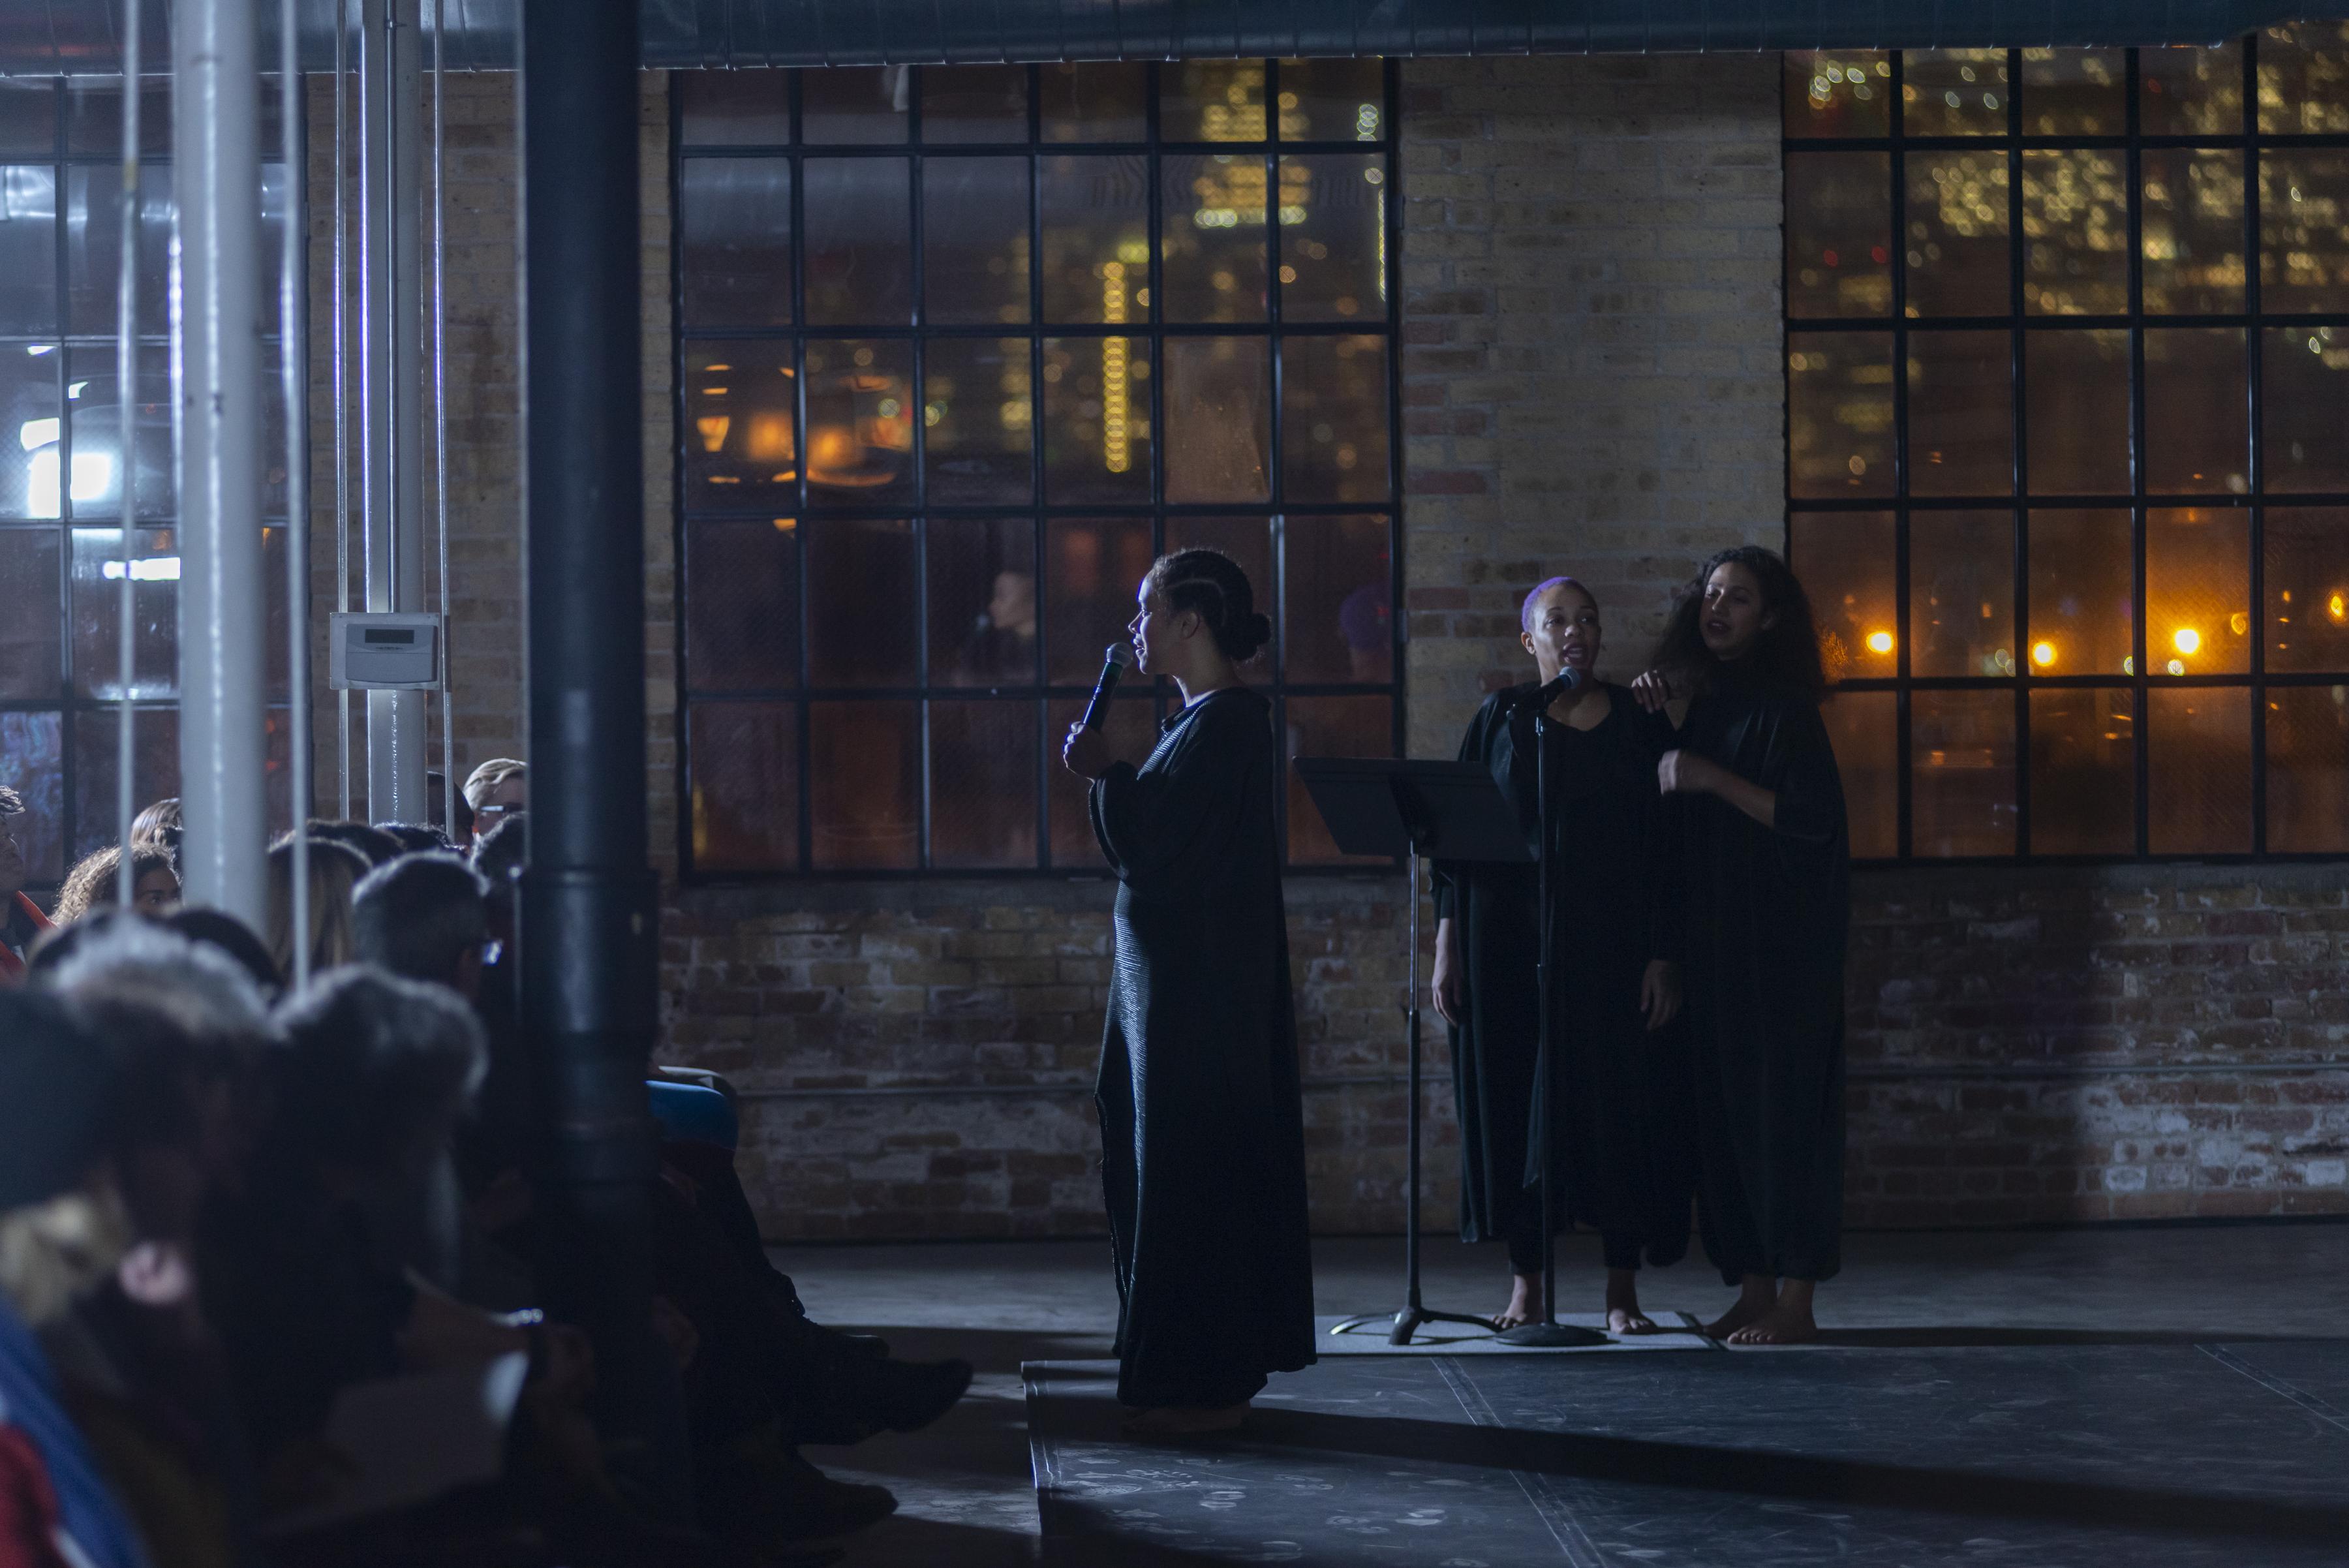 Before an audience, a person in a long, dark robe holds a microphone as two barefoot people in dark robes sing in the background.